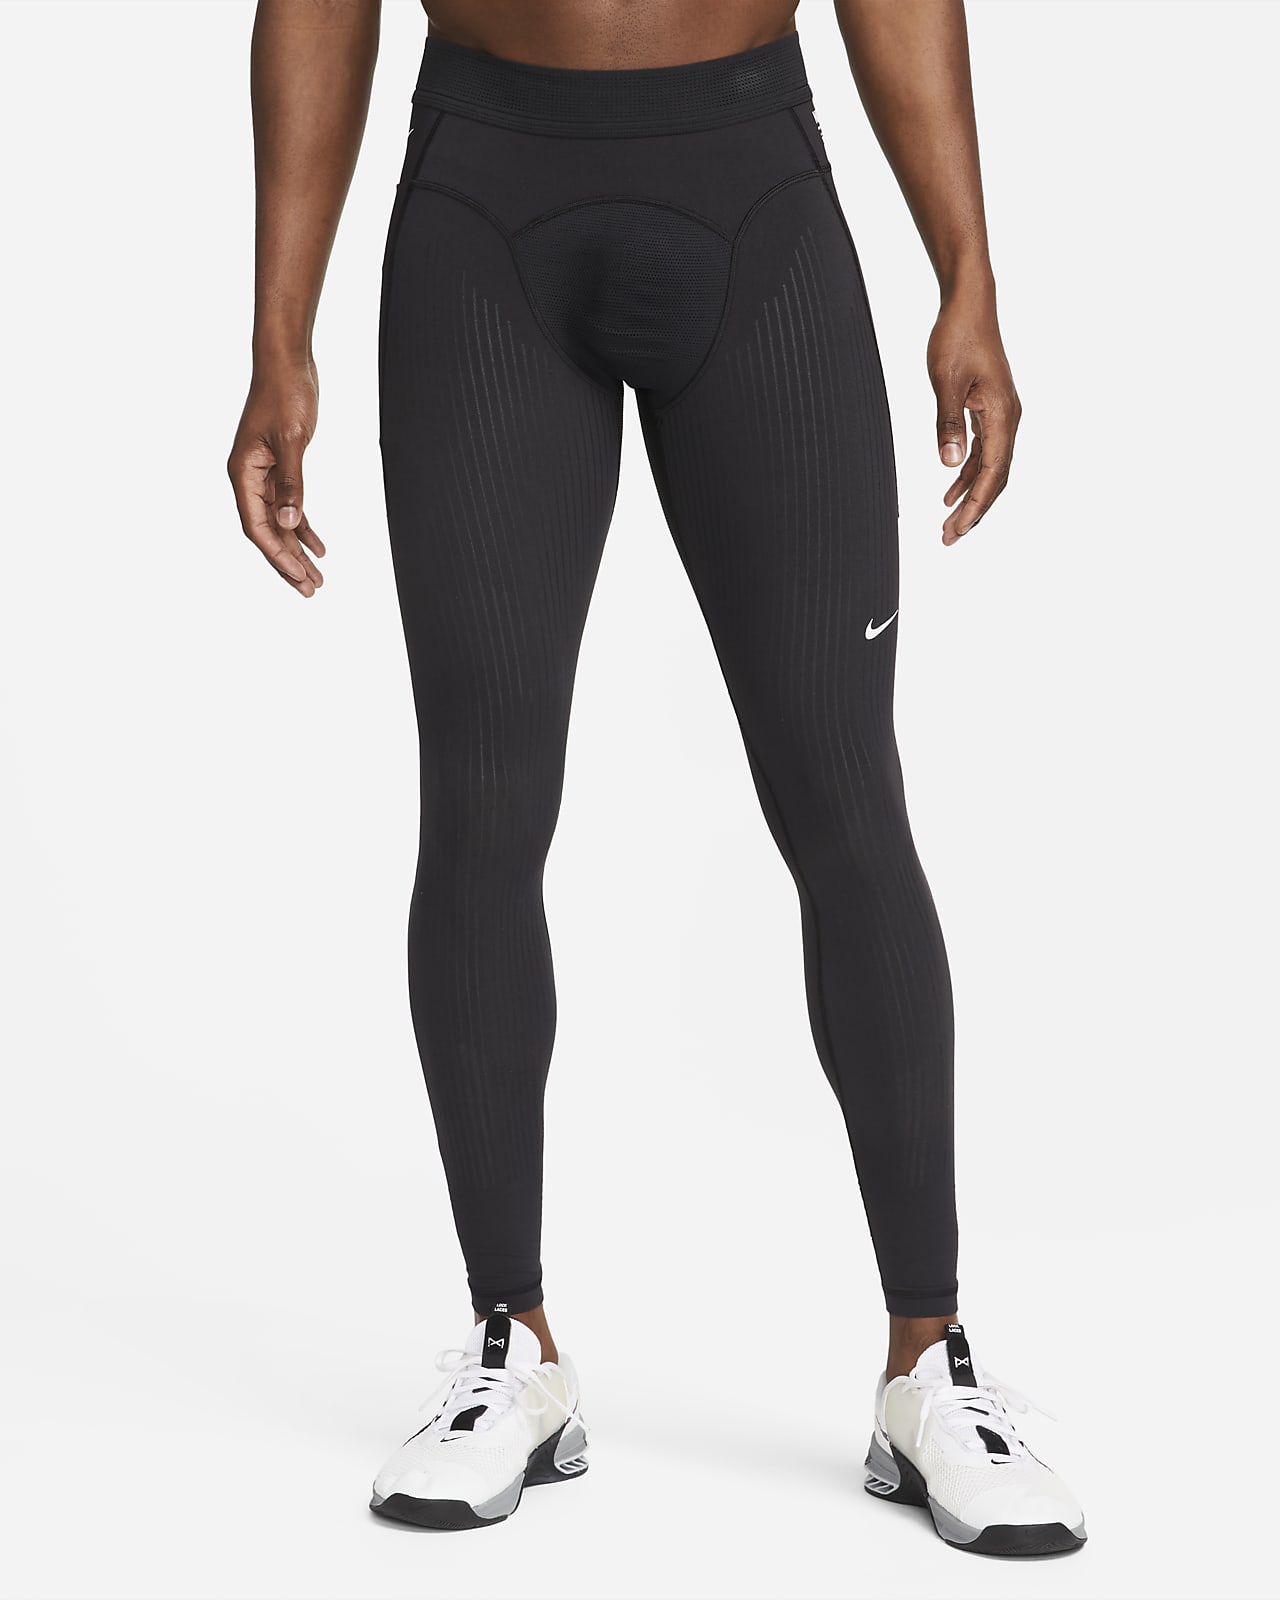 Nike Dri-FIT ADV A.P.S. Men's Recovery Training Tights